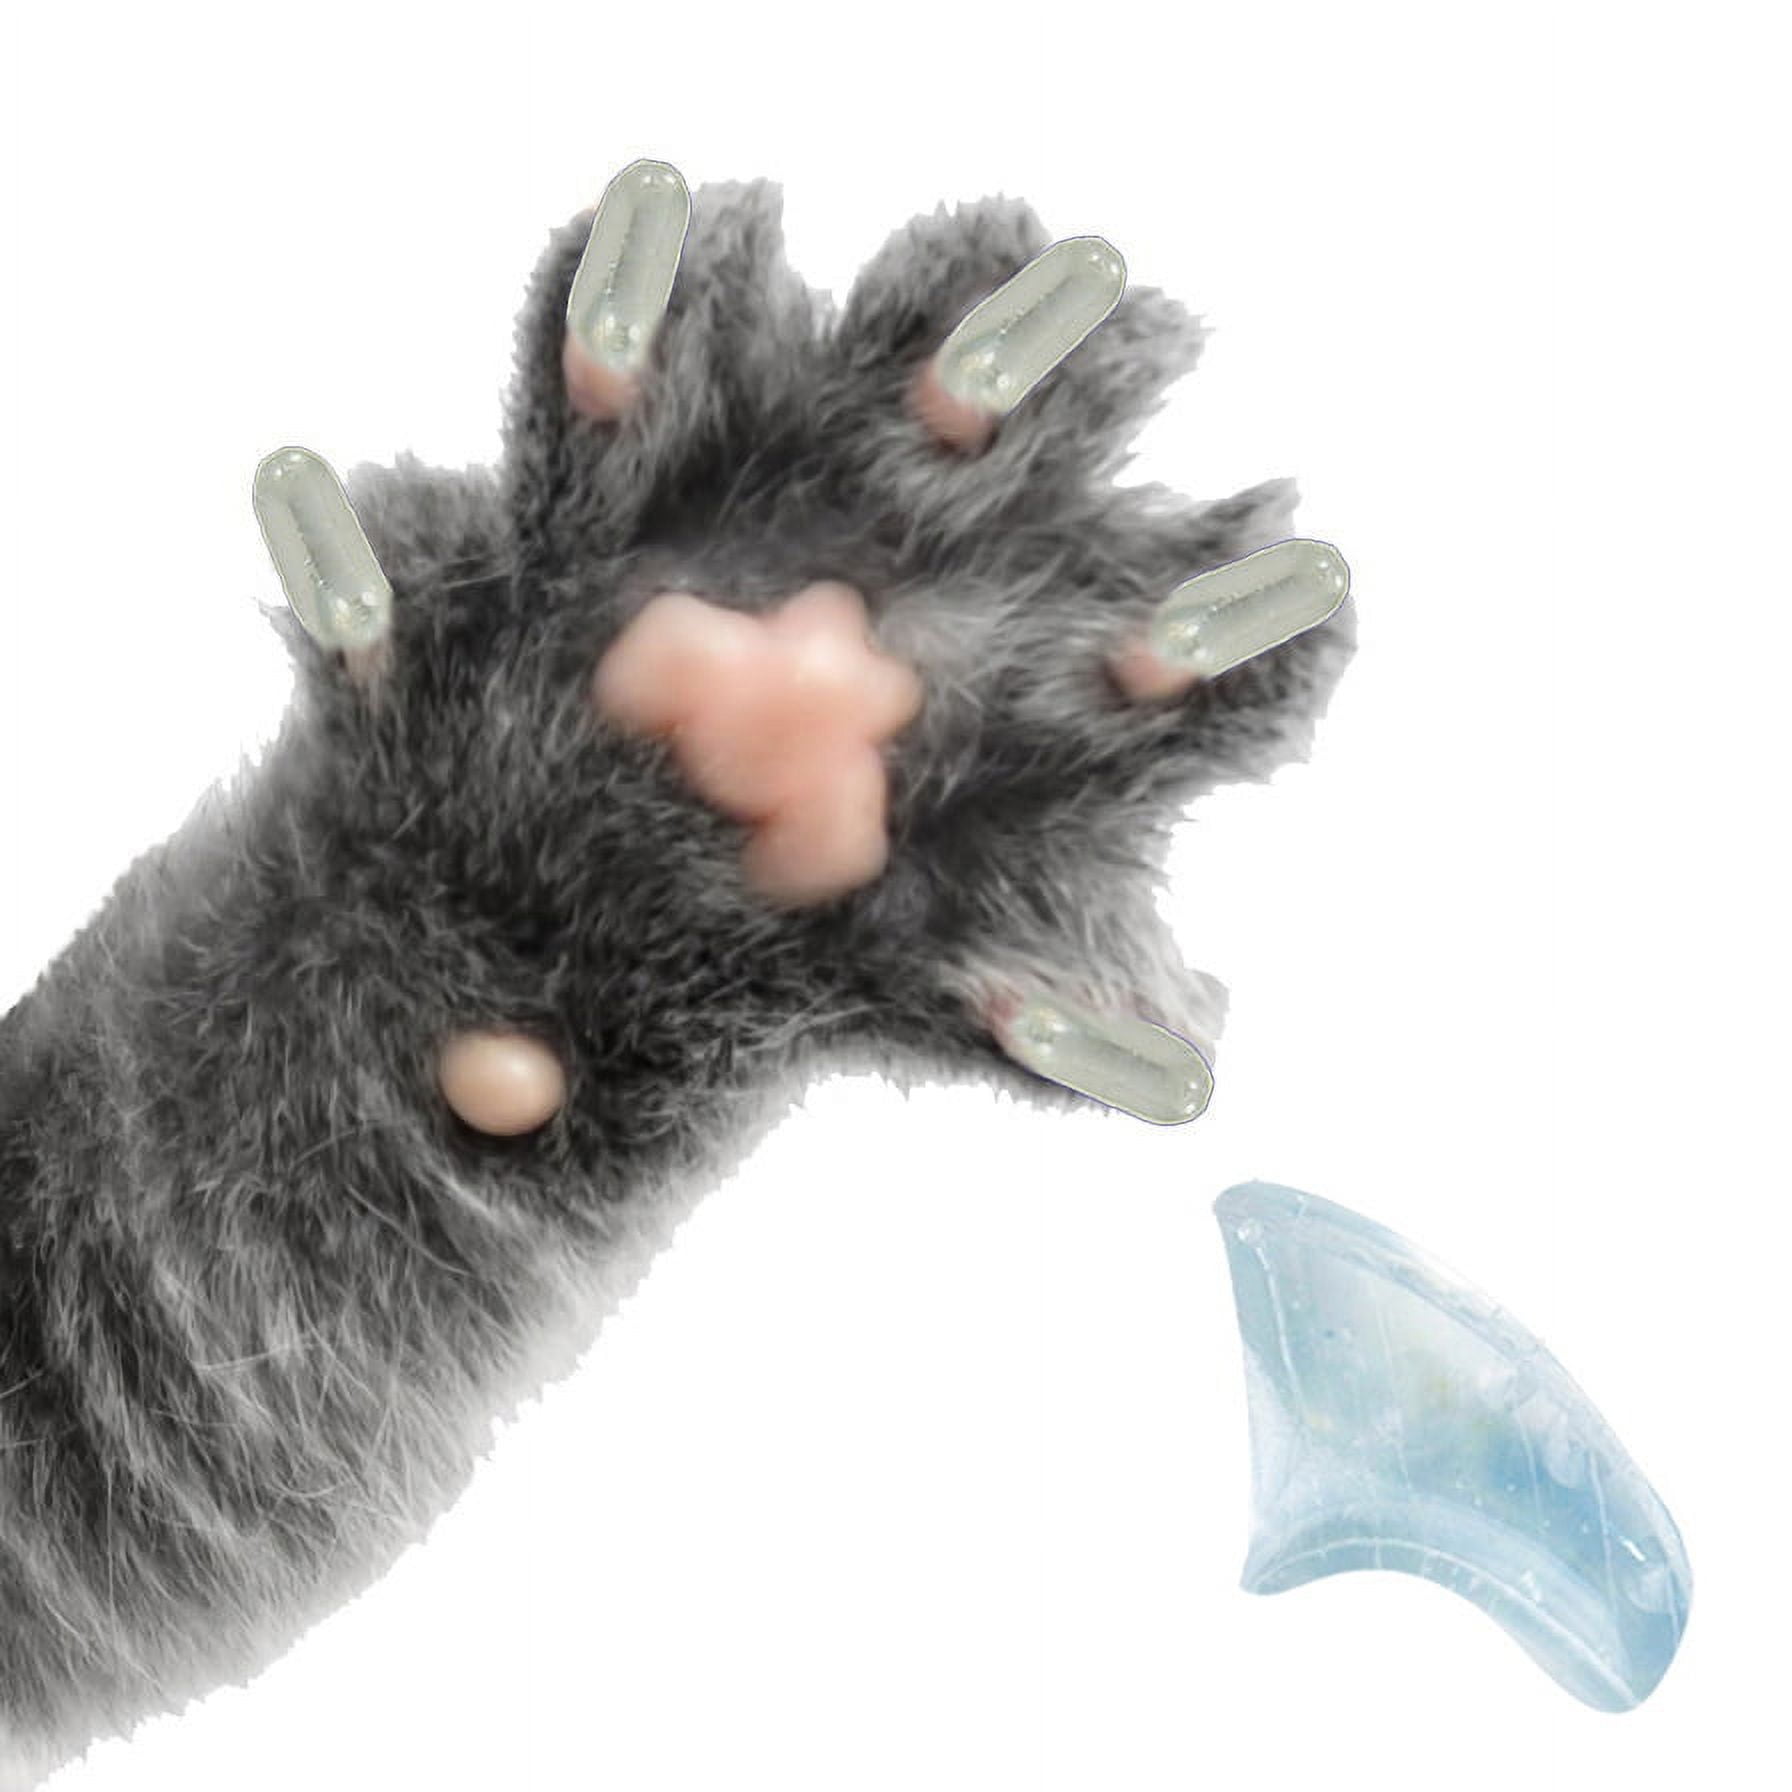 Soft Claws for Cats - CLS (Cleat Lock System), Size Medium, Color Clear